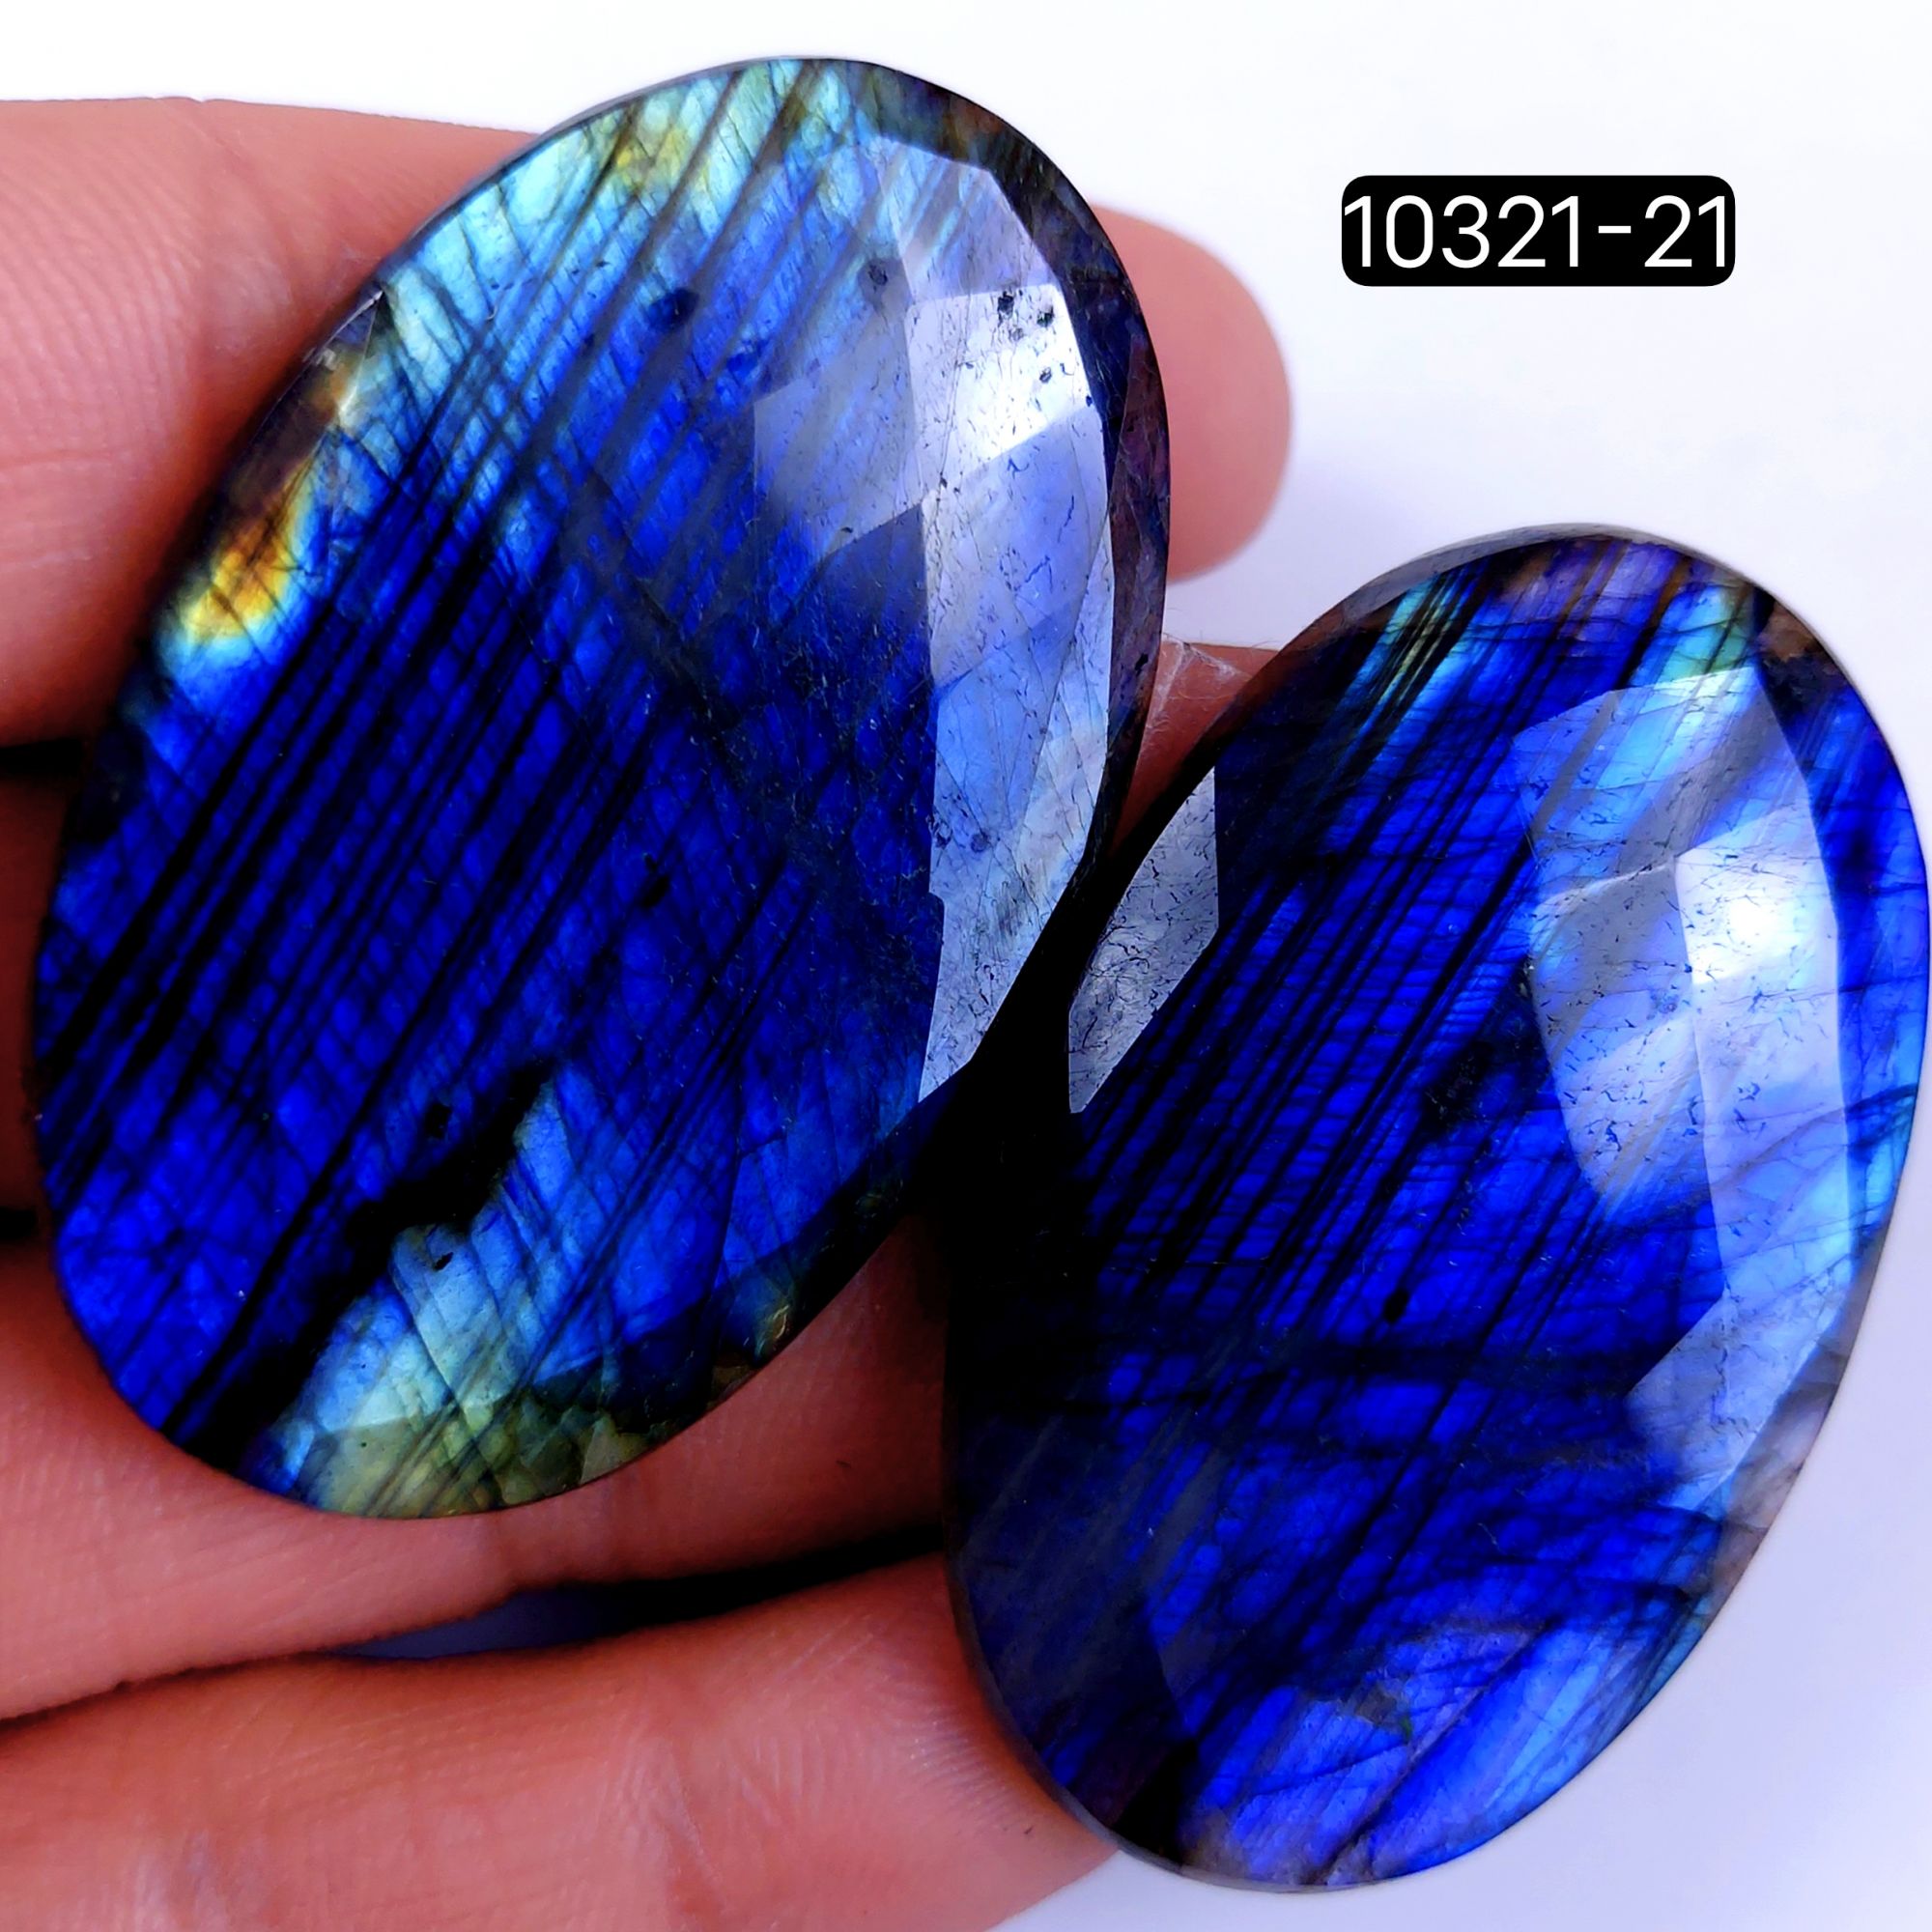 192Cts Natural Labradorite Faceted Cabochon Pair Polished Loose Gemstone Flat Back Multi Jewelry Making Crystal  51x32mm #10321-21